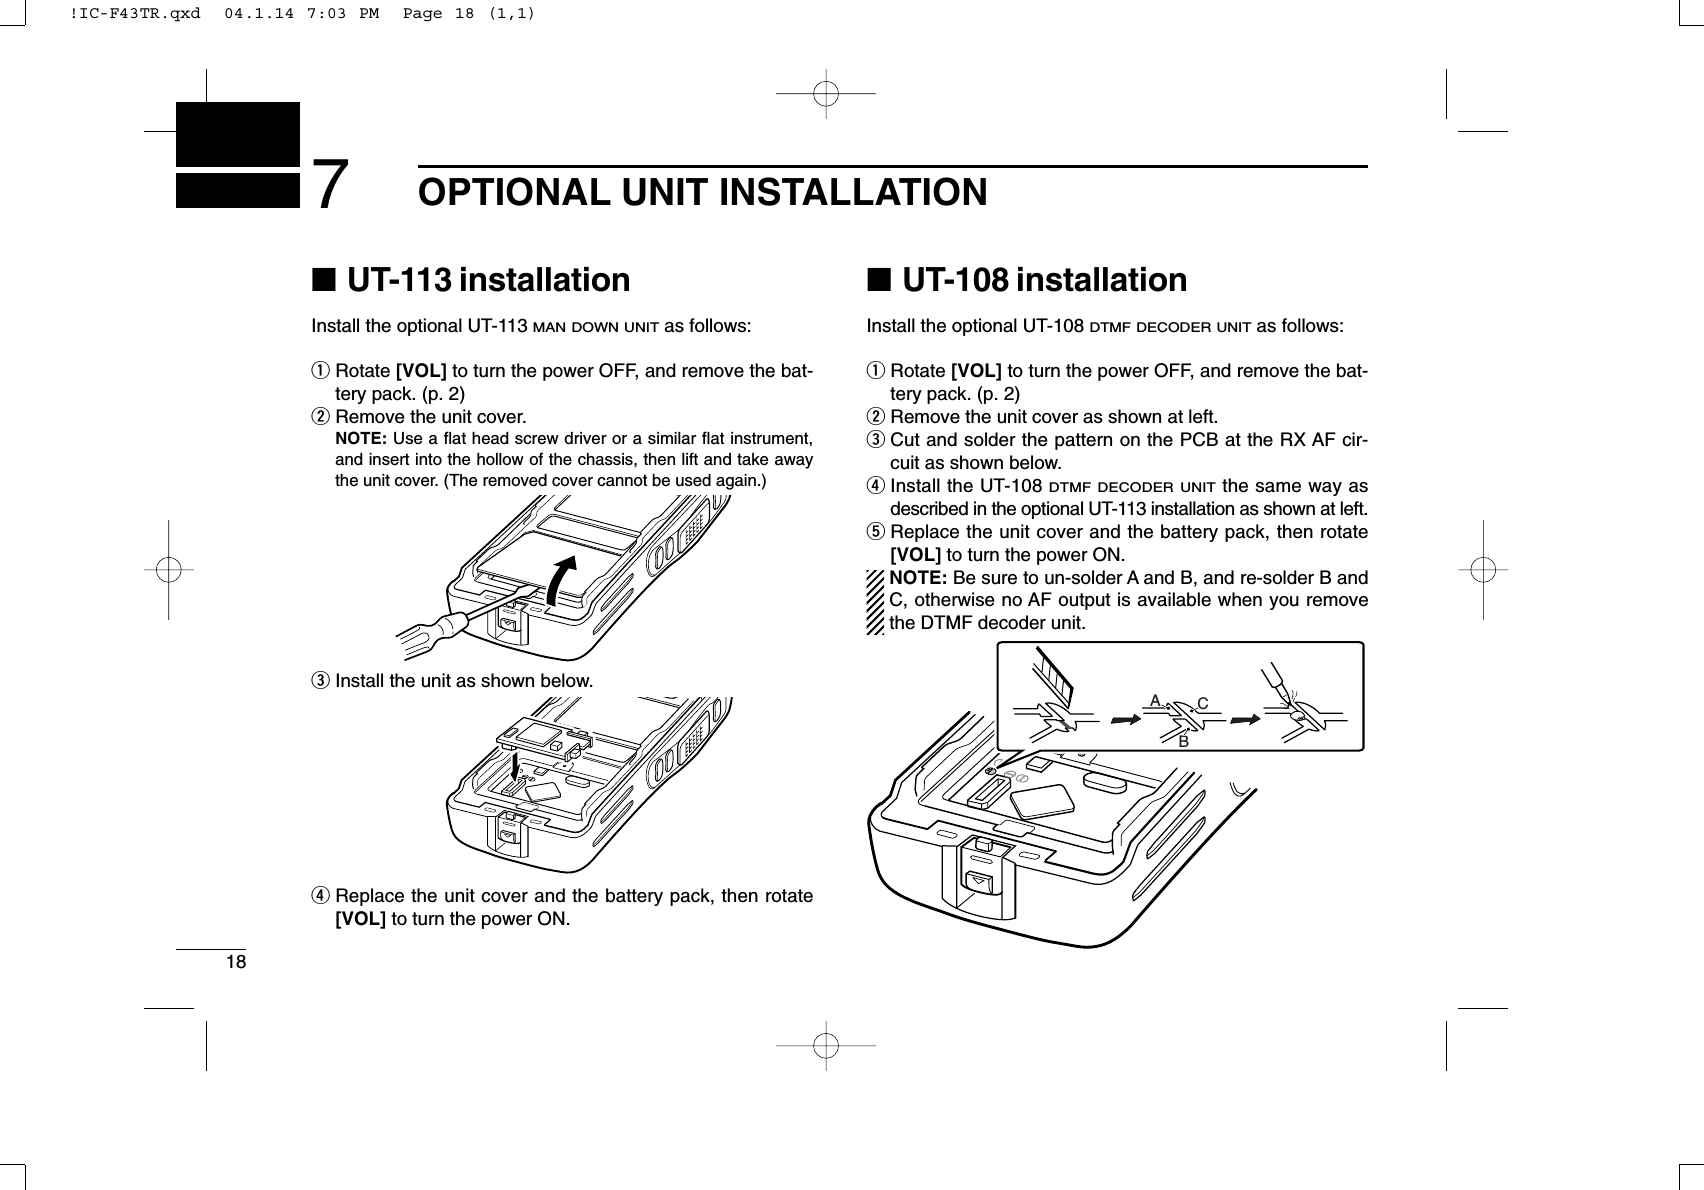 187OPTIONAL UNIT INSTALLATION■UT-113 installationInstall the optional UT-113 MAN DOWN UNITas follows:qRotate [VOL] to turn the power OFF, and remove the bat-tery pack. (p. 2)wRemove the unit cover.NOTE: Use a ﬂat head screw driver or a similar ﬂat instrument,and insert into the hollow of the chassis, then lift and take awaythe unit cover. (The removed cover cannot be used again.)eInstall the unit as shown below.rReplace the unit cover and the battery pack, then rotate[VOL] to turn the power ON.■UT-108 installationInstall the optional UT-108 DTMF DECODER UNITas follows:qRotate [VOL] to turn the power OFF, and remove the bat-tery pack. (p. 2)wRemove the unit cover as shown at left.eCut and solder the pattern on the PCB at the RX AF cir-cuit as shown below.rInstall the UT-108 DTMF DECODER UNITthe same way asdescribed in the optional UT-113 installation as shown at left.tReplace the unit cover and the battery pack, then rotate[VOL] to turn the power ON.NOTE: Be sure to un-solder A and B, and re-solder B andC, otherwise no AF output is available when you removethe DTMF decoder unit.ABC!IC-F43TR.qxd  04.1.14 7:03 PM  Page 18 (1,1)